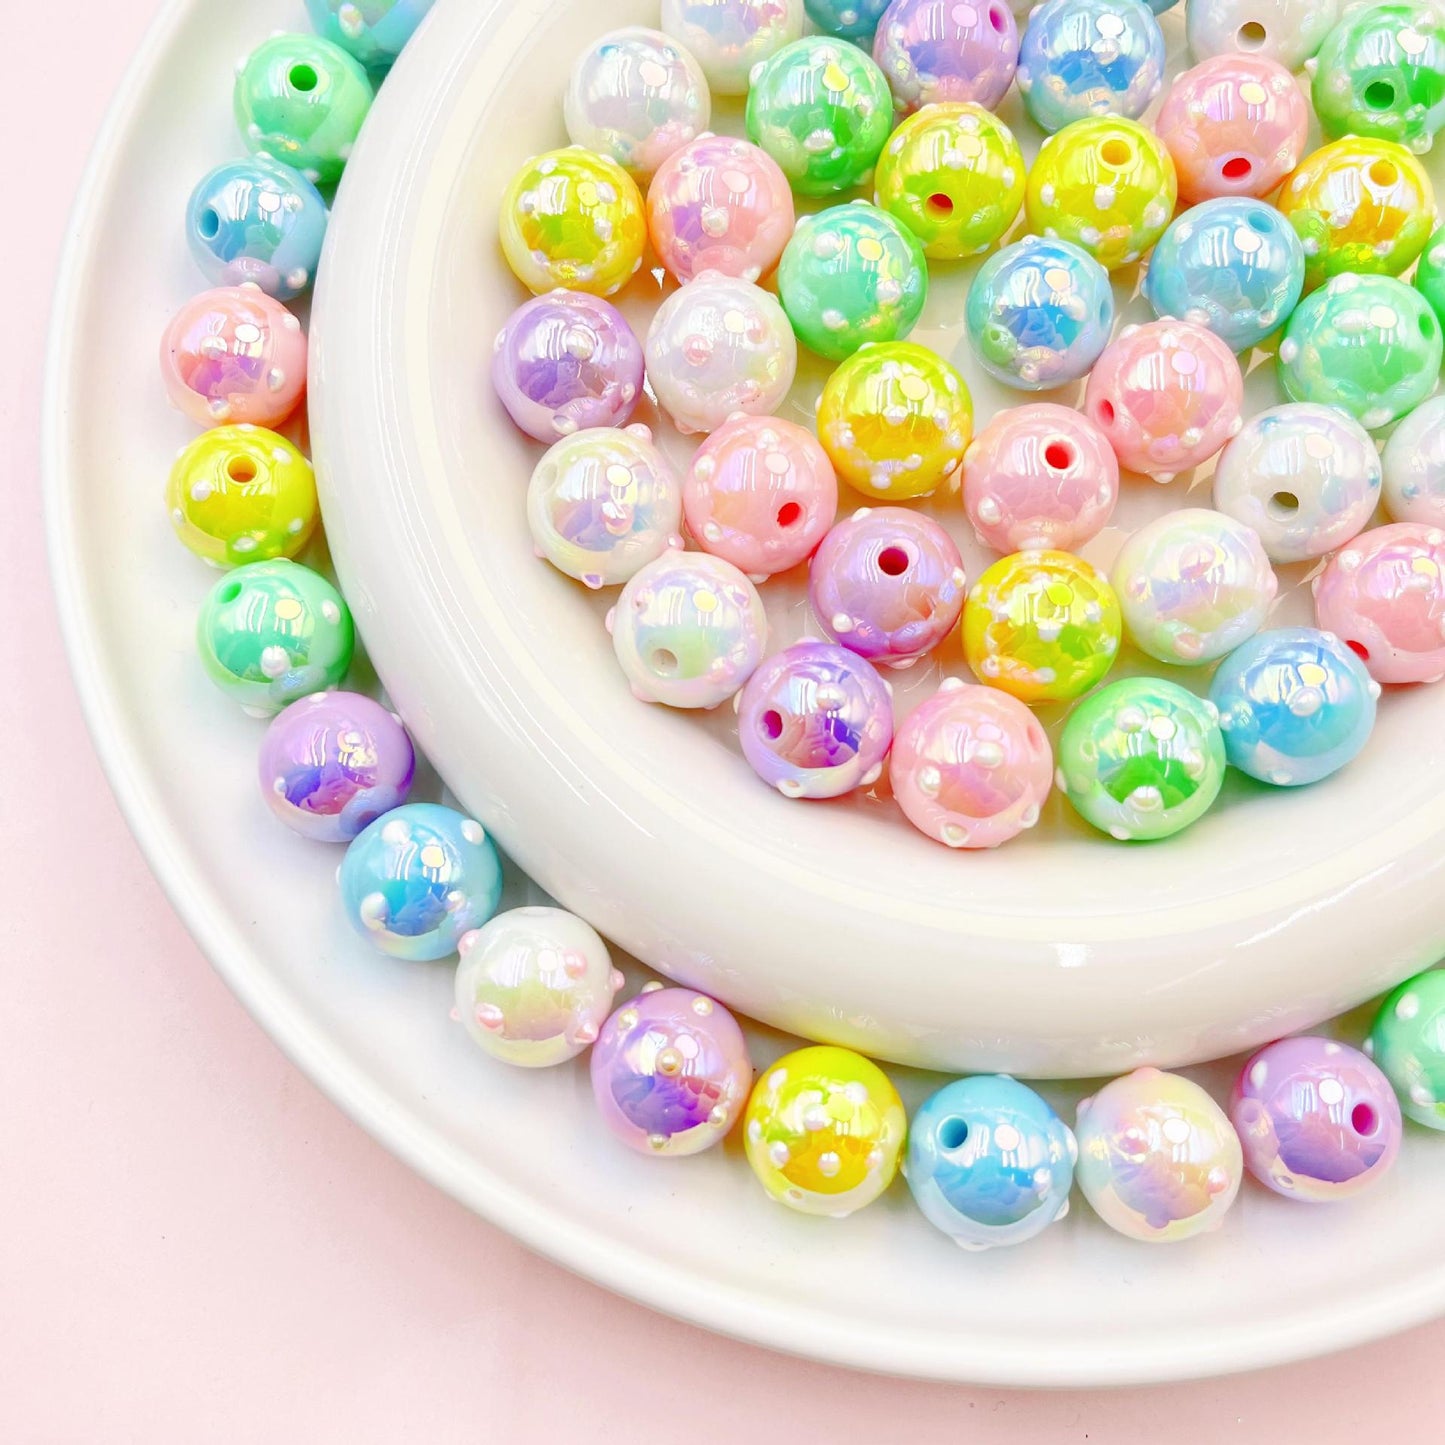 20 Pieces Donut Beads Beads